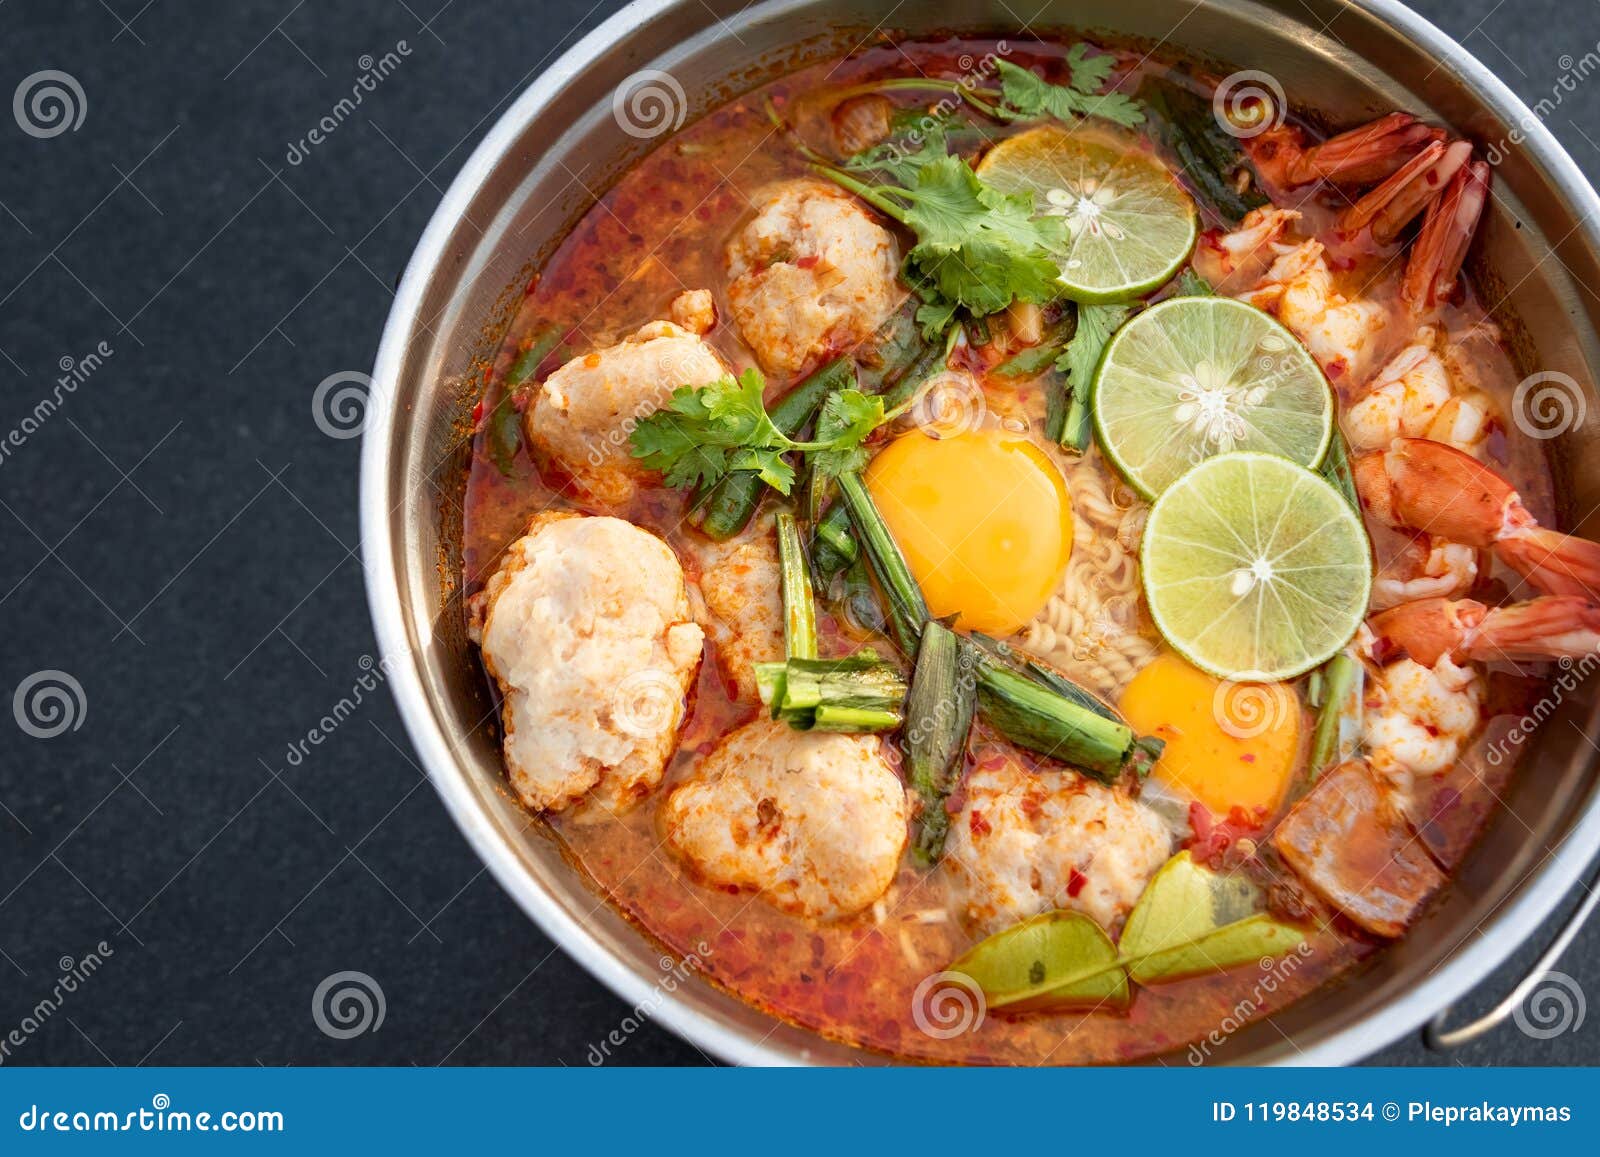 Tom Yum Goong Soup Fire Pot Traditional Asian Food Stock Photo - Image ...